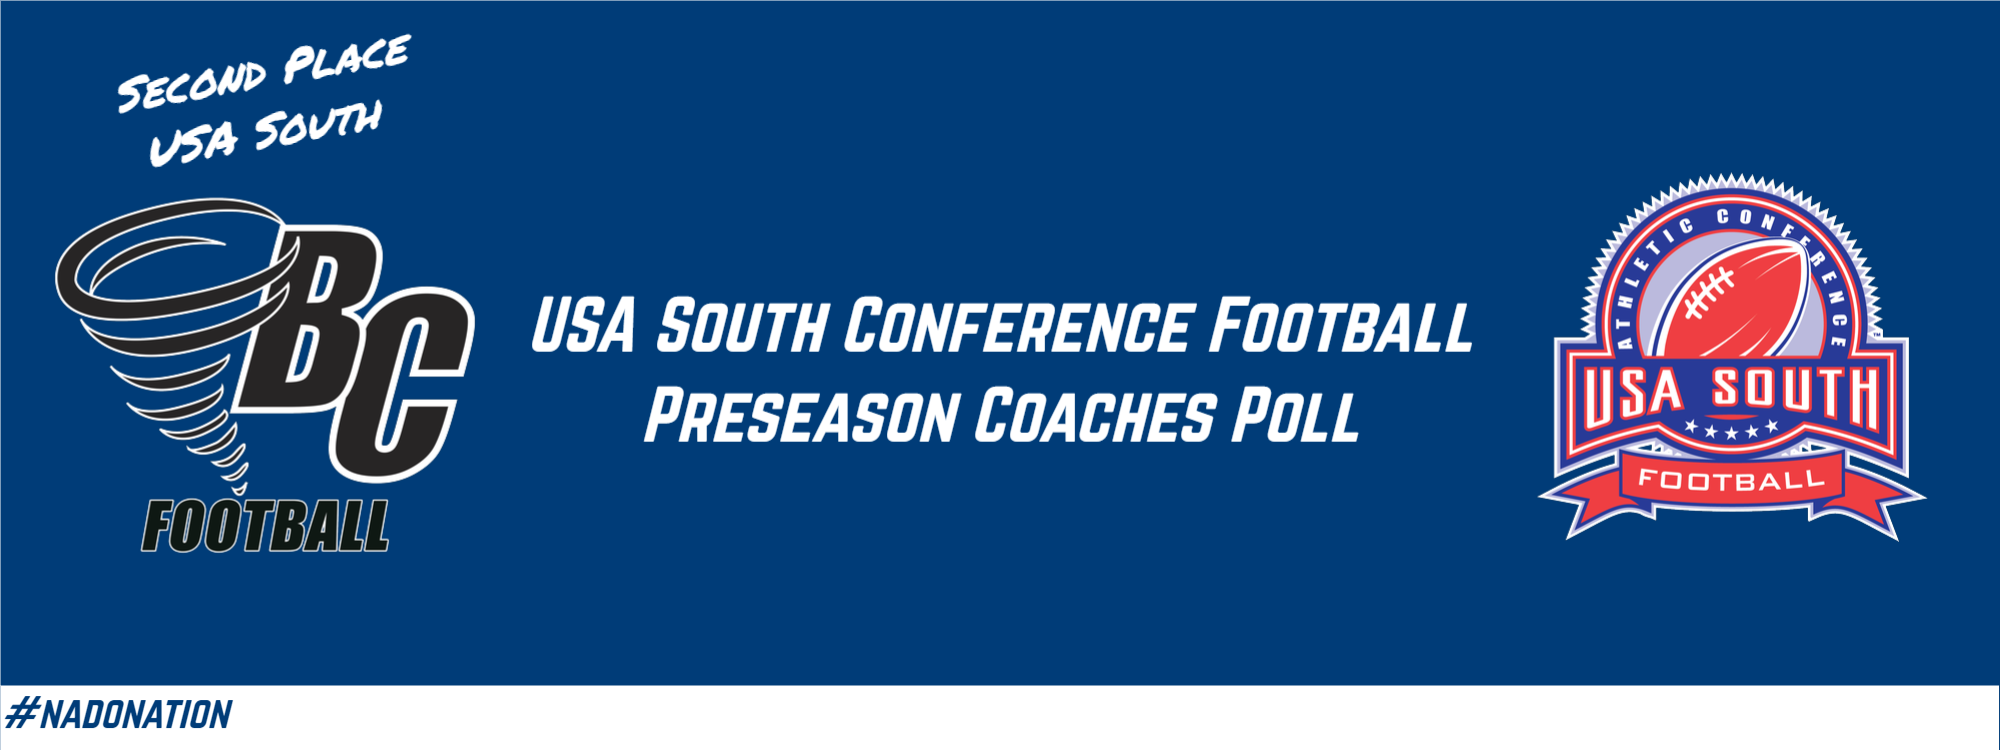 Football Picked Second in USA South Conference Preseason Coaches Poll